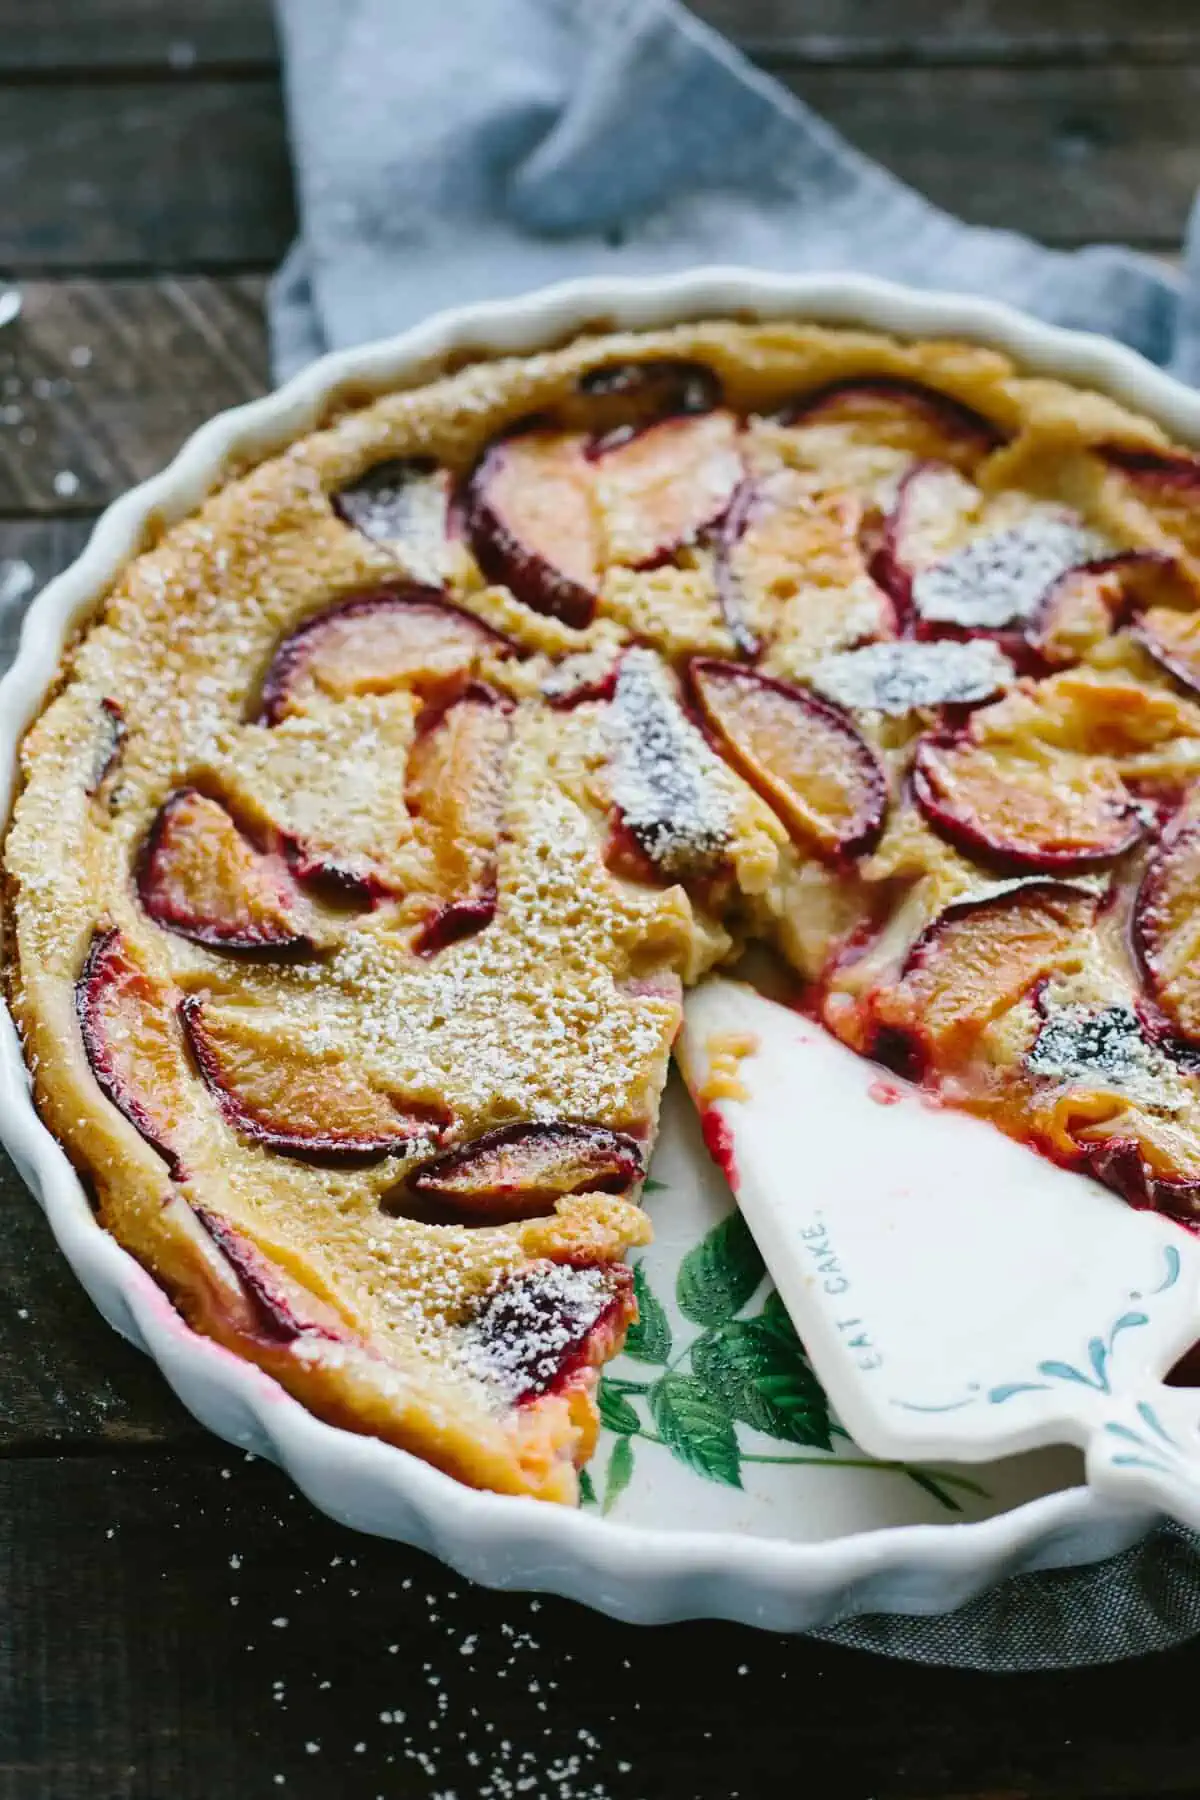 Top down view of a plum clafoutis in a white baking dish with a pie server.